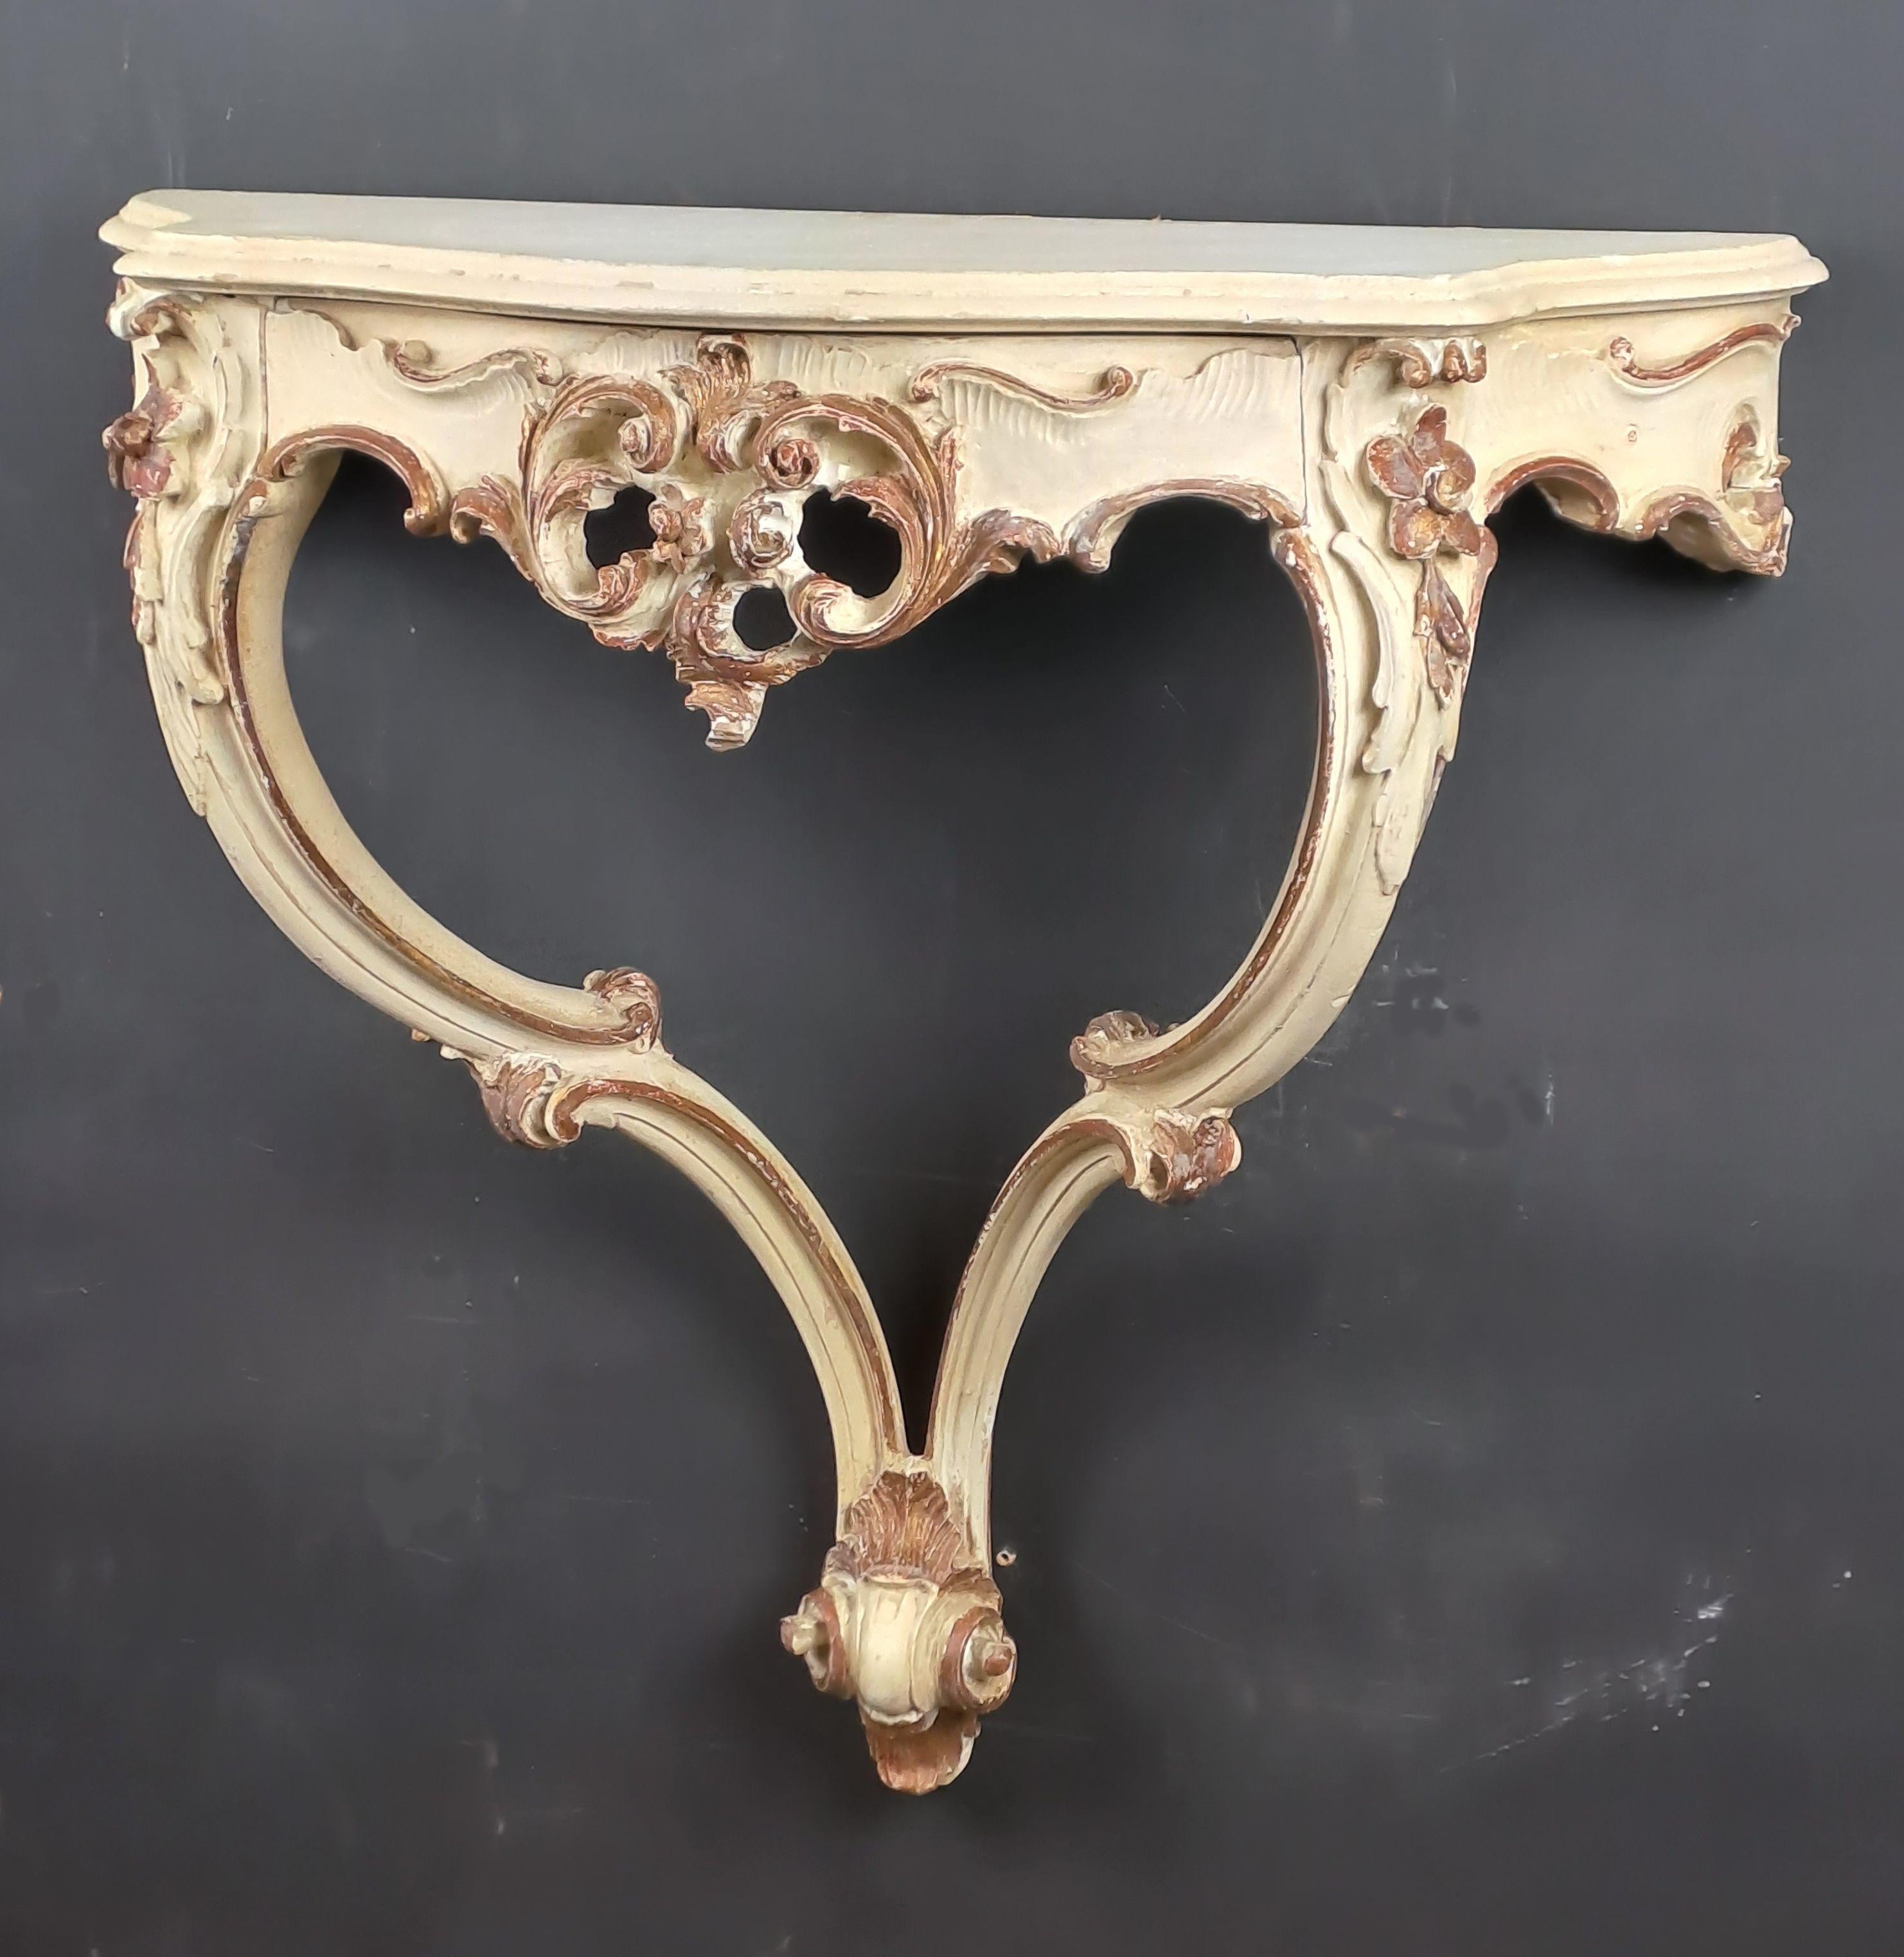 Rococo Revival Rocaille Console In Lacquered And Gilded Wood For Sale